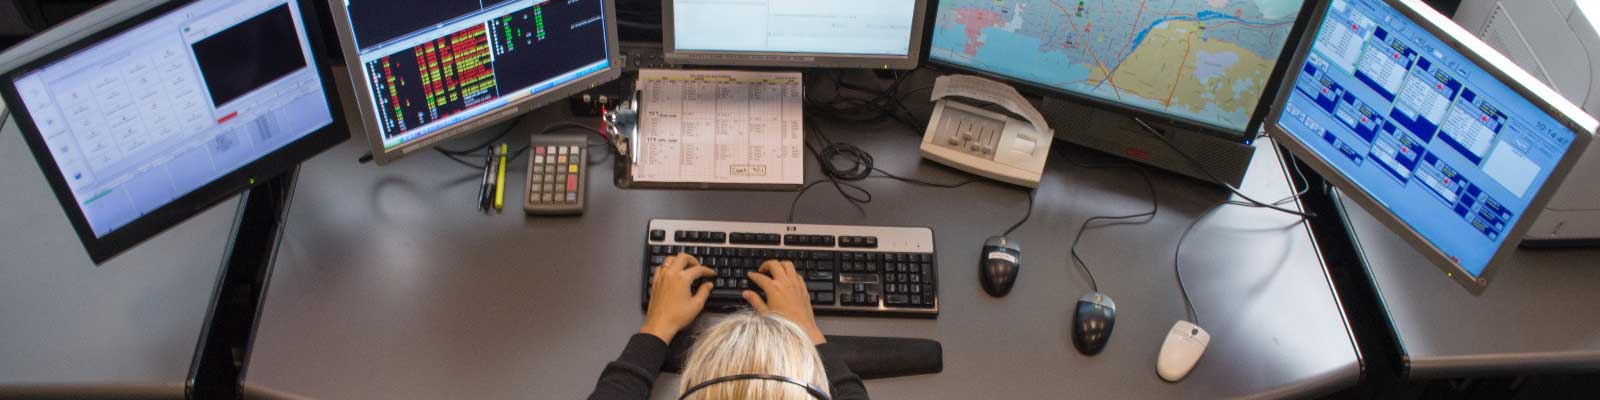 call-taker-sitting-at-desk-in-front-of-multiple-monitors-taking-emergency-calls-and-routing-first-responders-using-next-gen-911-technology